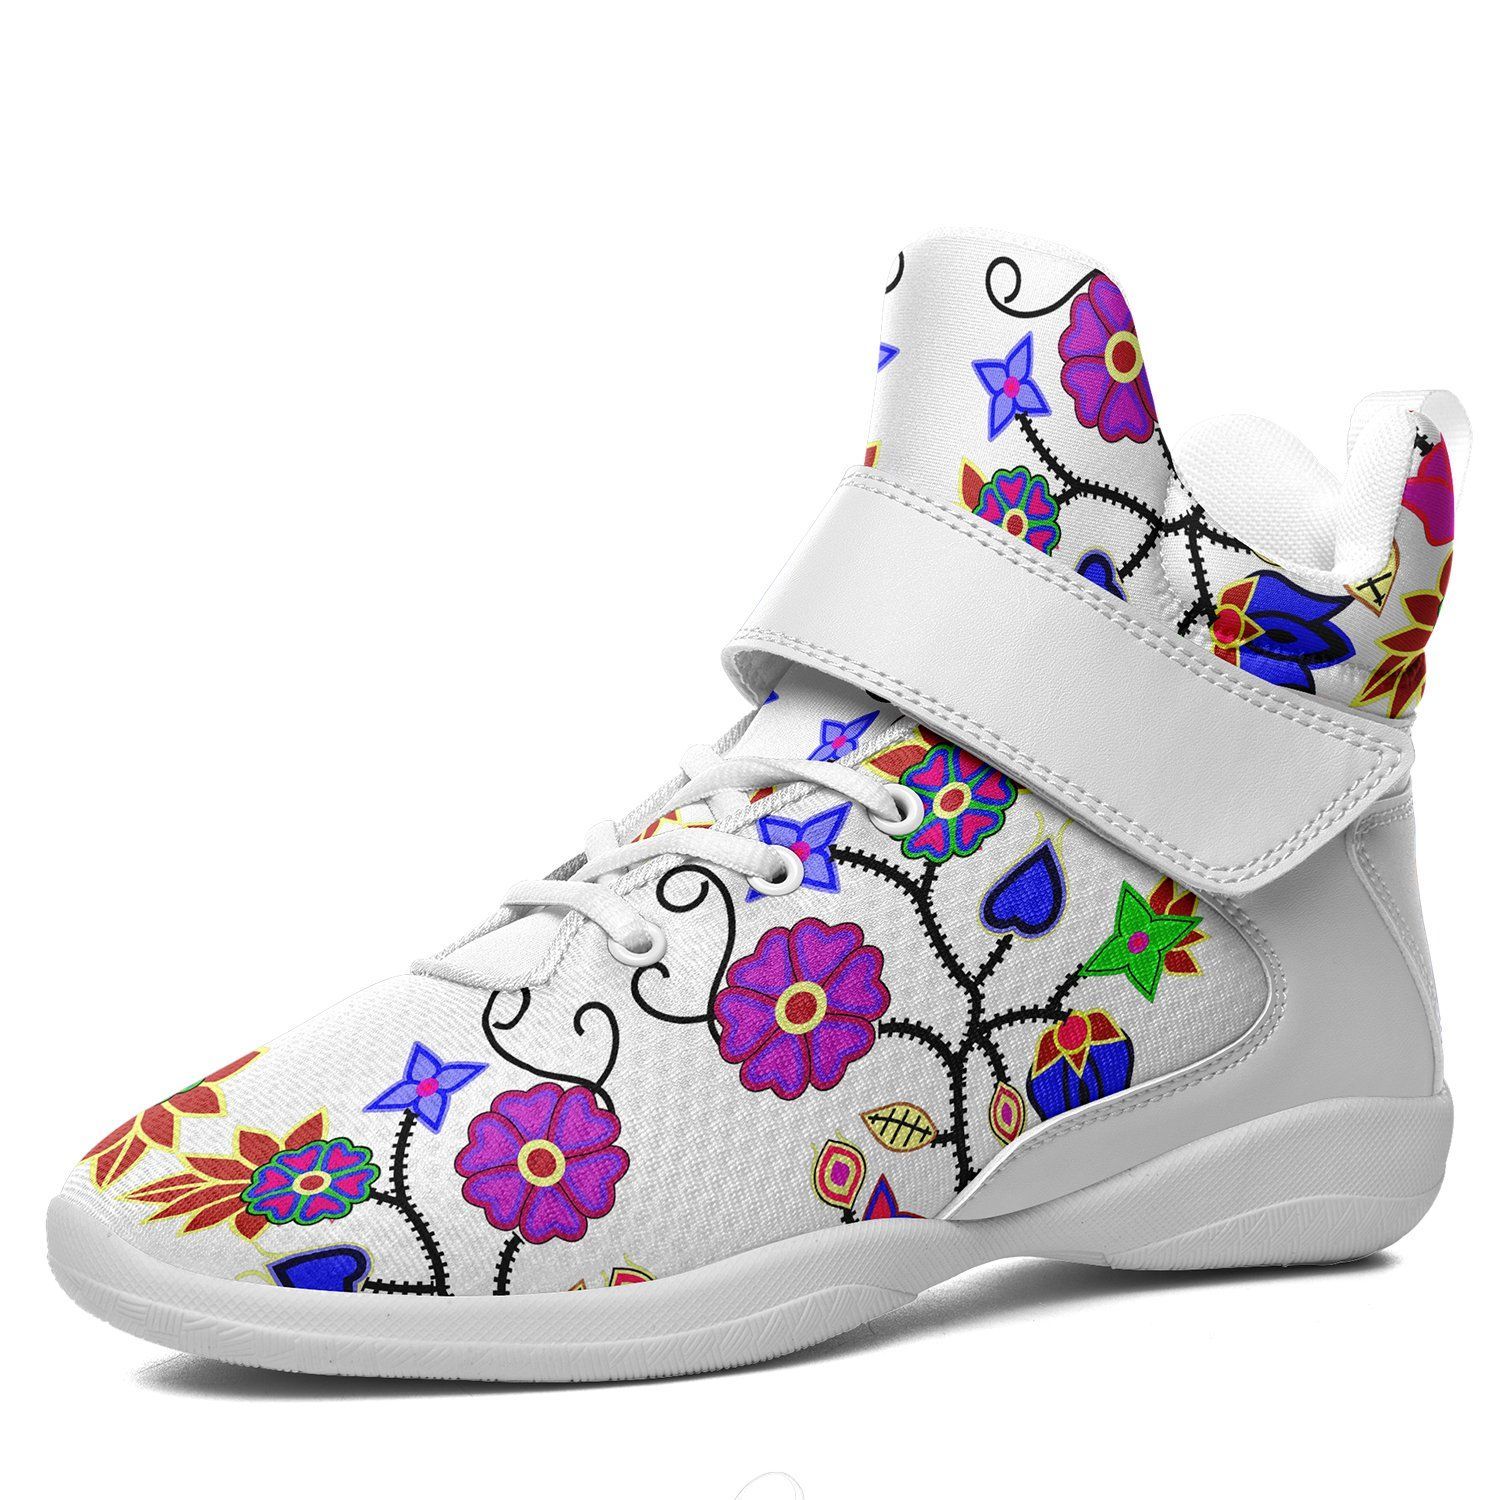 Floral Beadwork Seven Clans White Kid's Ipottaa Basketball / Sport High Top Shoes 49 Dzine US Child 12.5 / EUR 30 White Sole with White Strap 